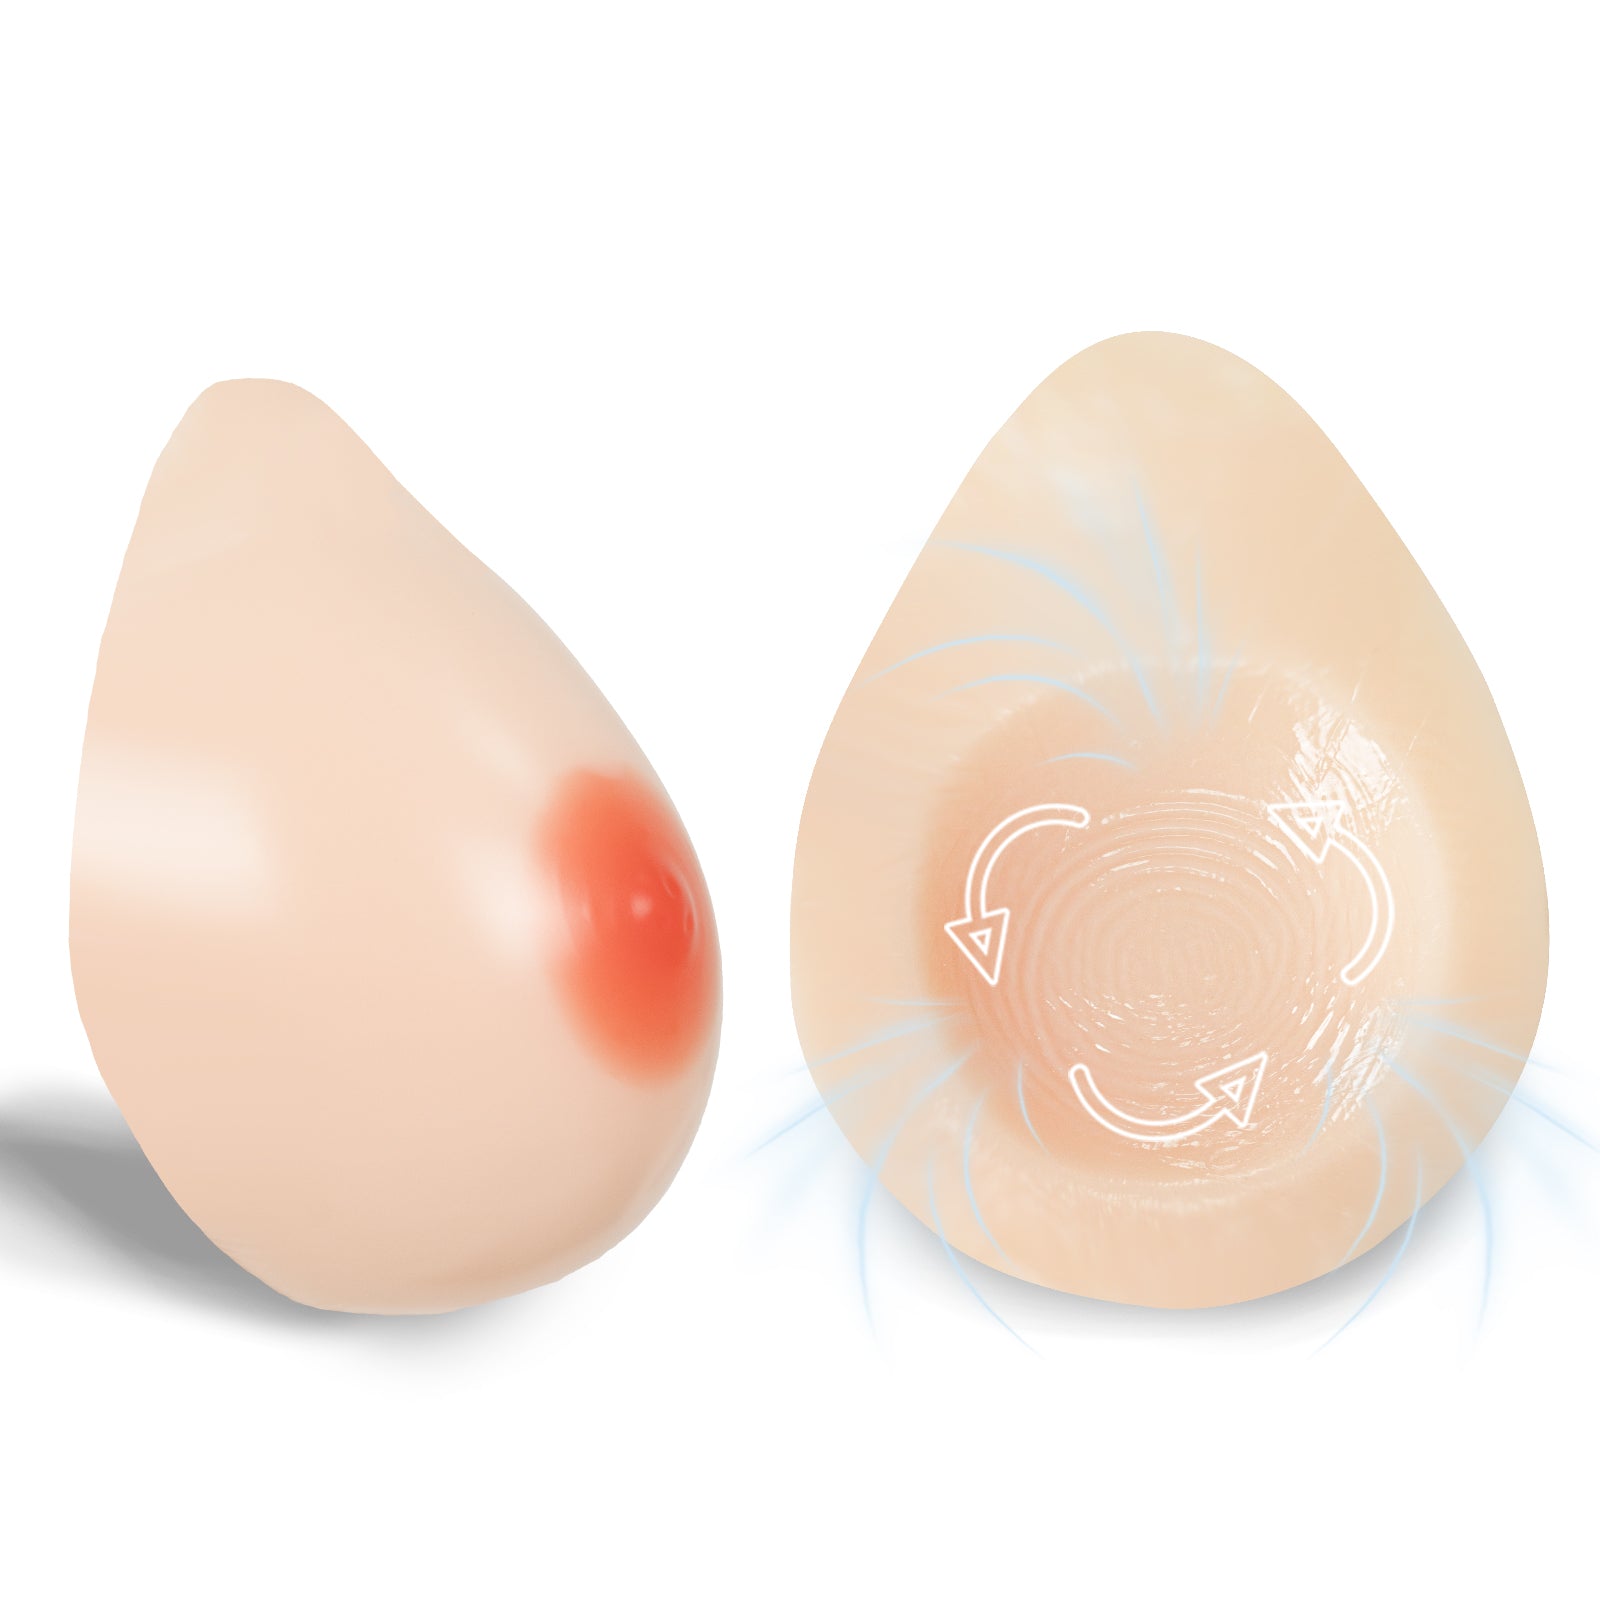 One Pair Adhesive Sticky Silicone Breast Forms for Mastectomy